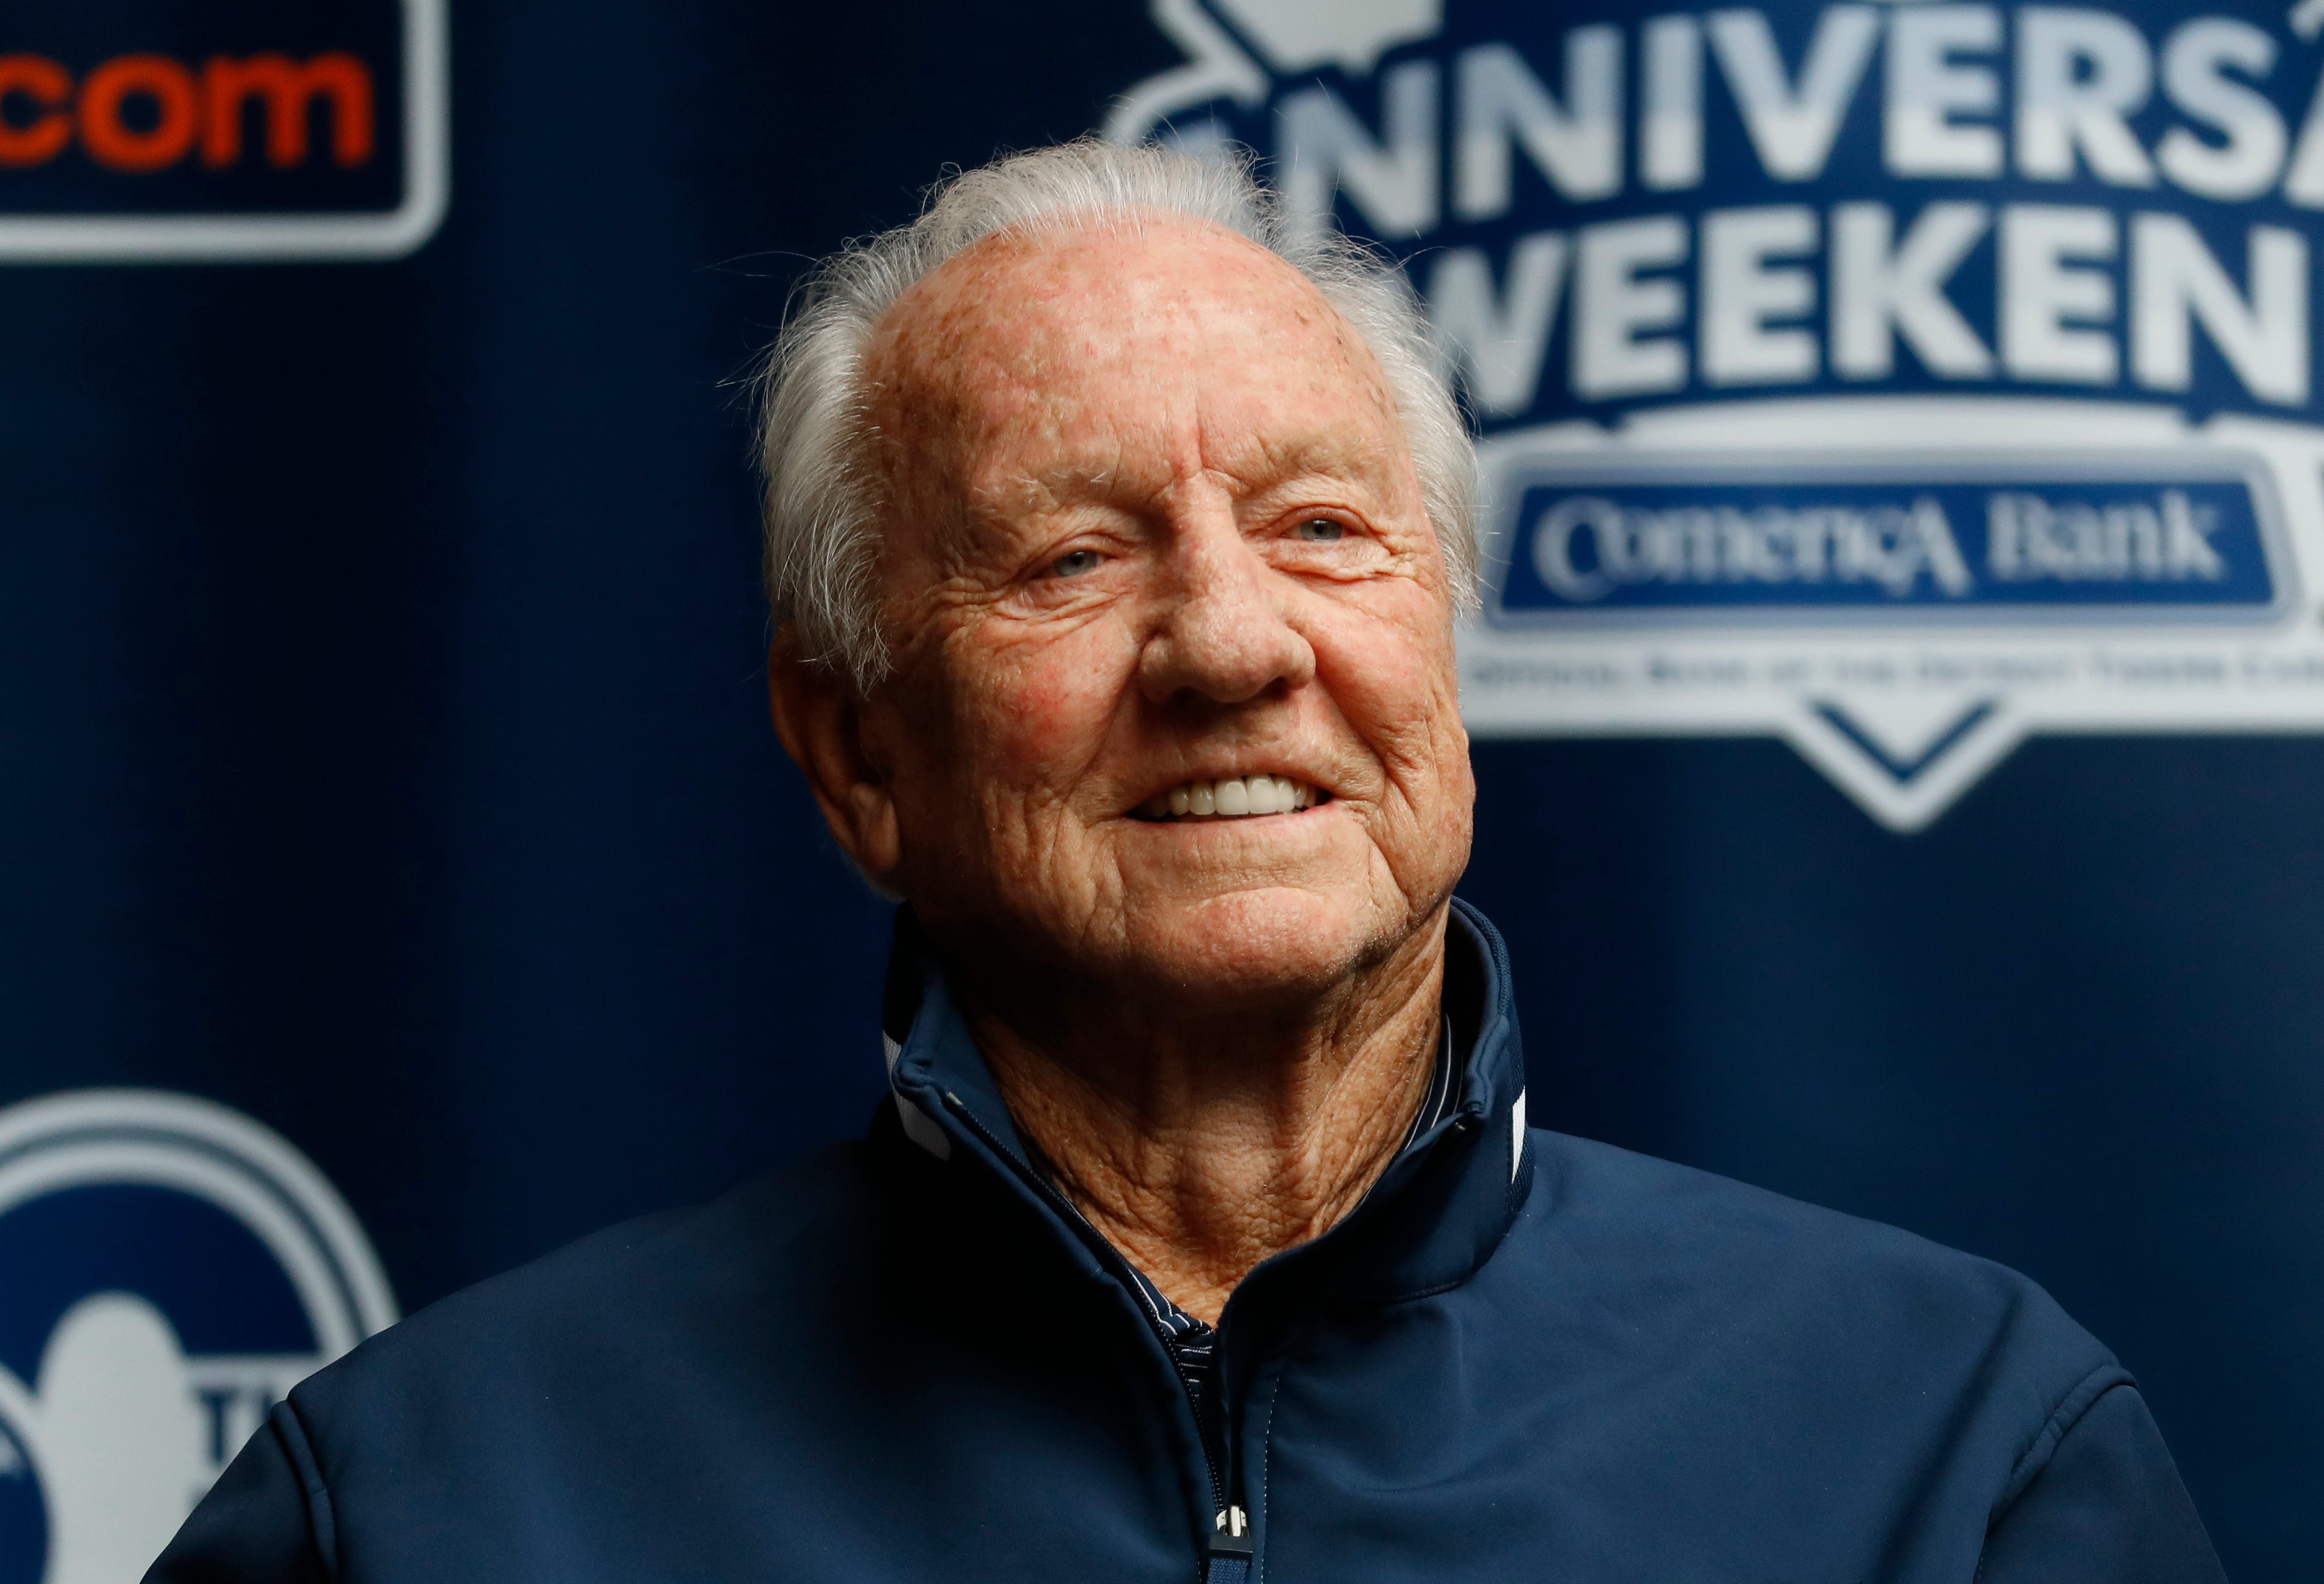 Al Kaline, a member of the 1968 World Series Champion Detroit Tigers, smiles during a promotional press conference in September of 2018.